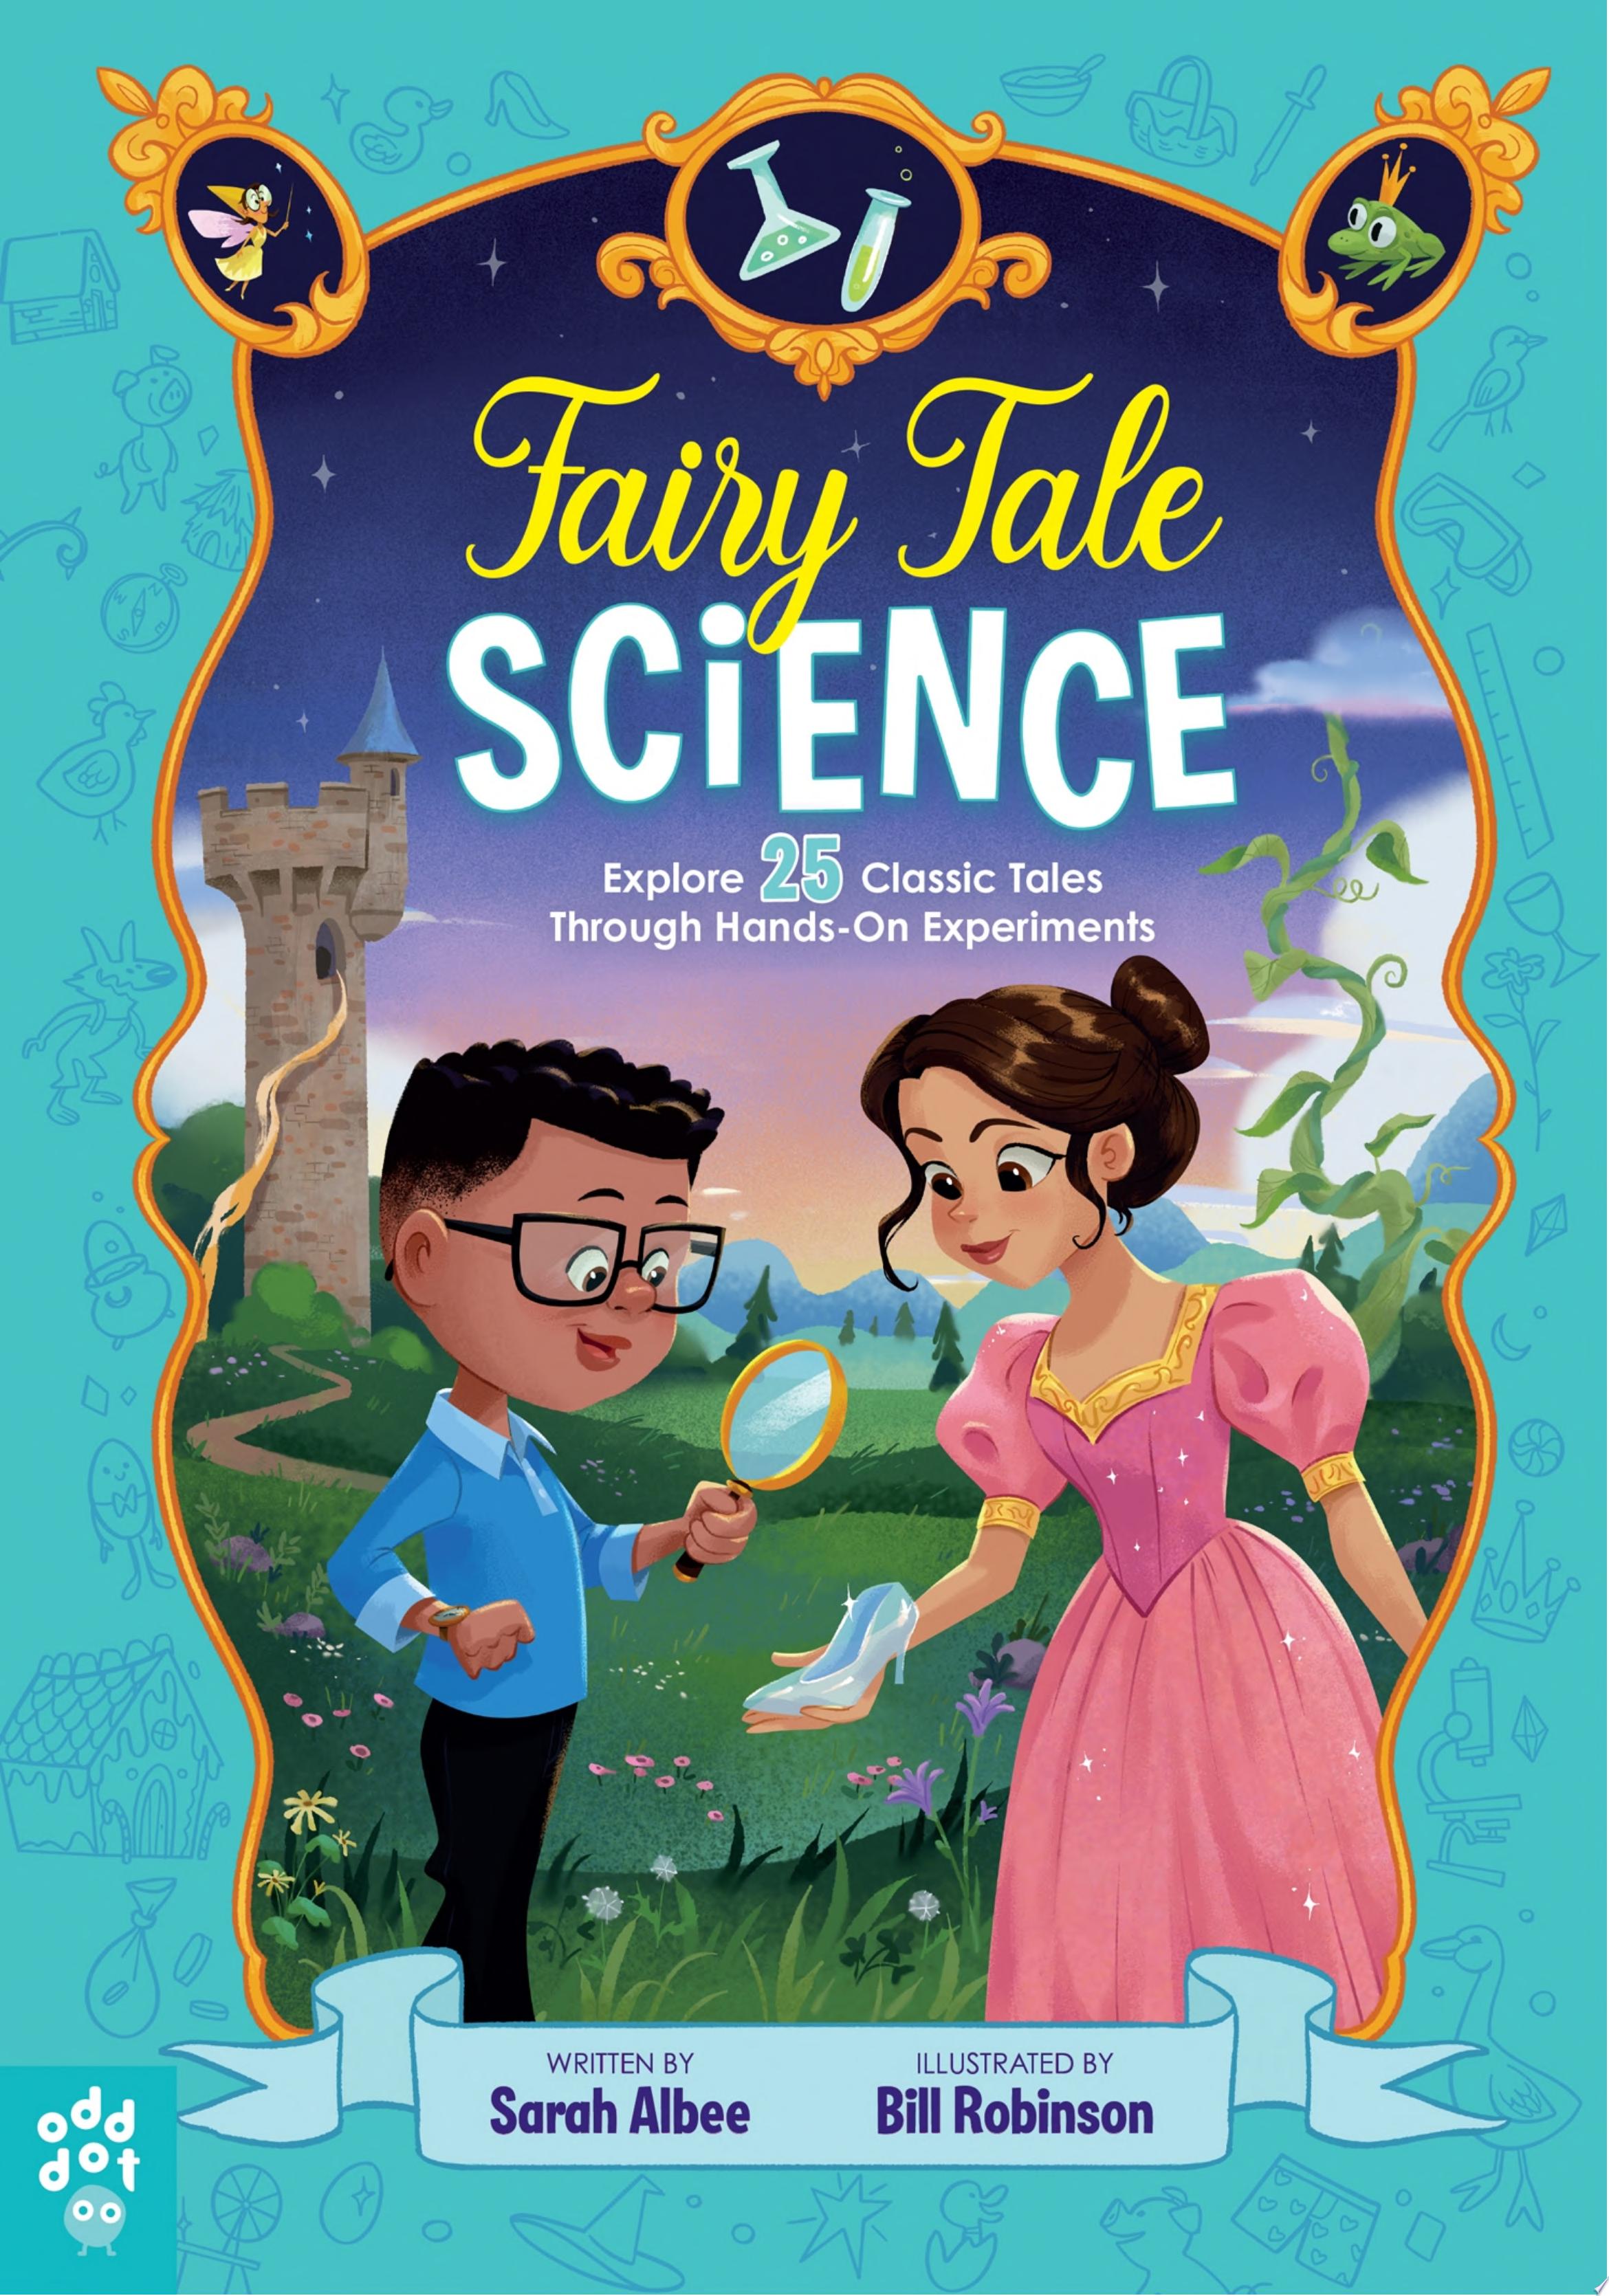 Image for "Fairy Tale Science"